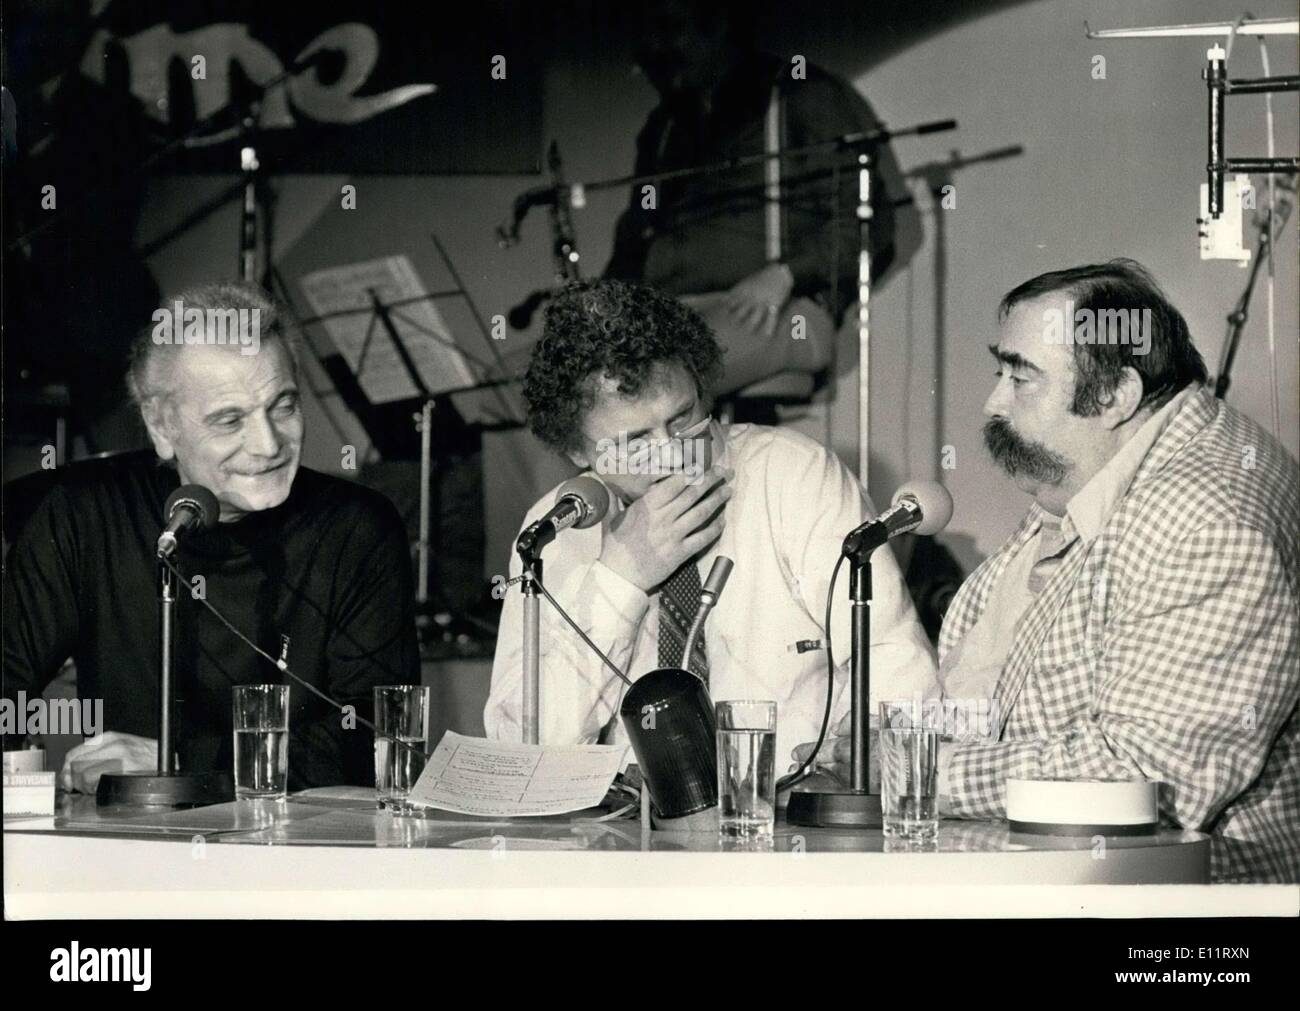 Nov. 02, 1979 - Georges Brassens, Jacques Martin, and Moustache Stock Photo